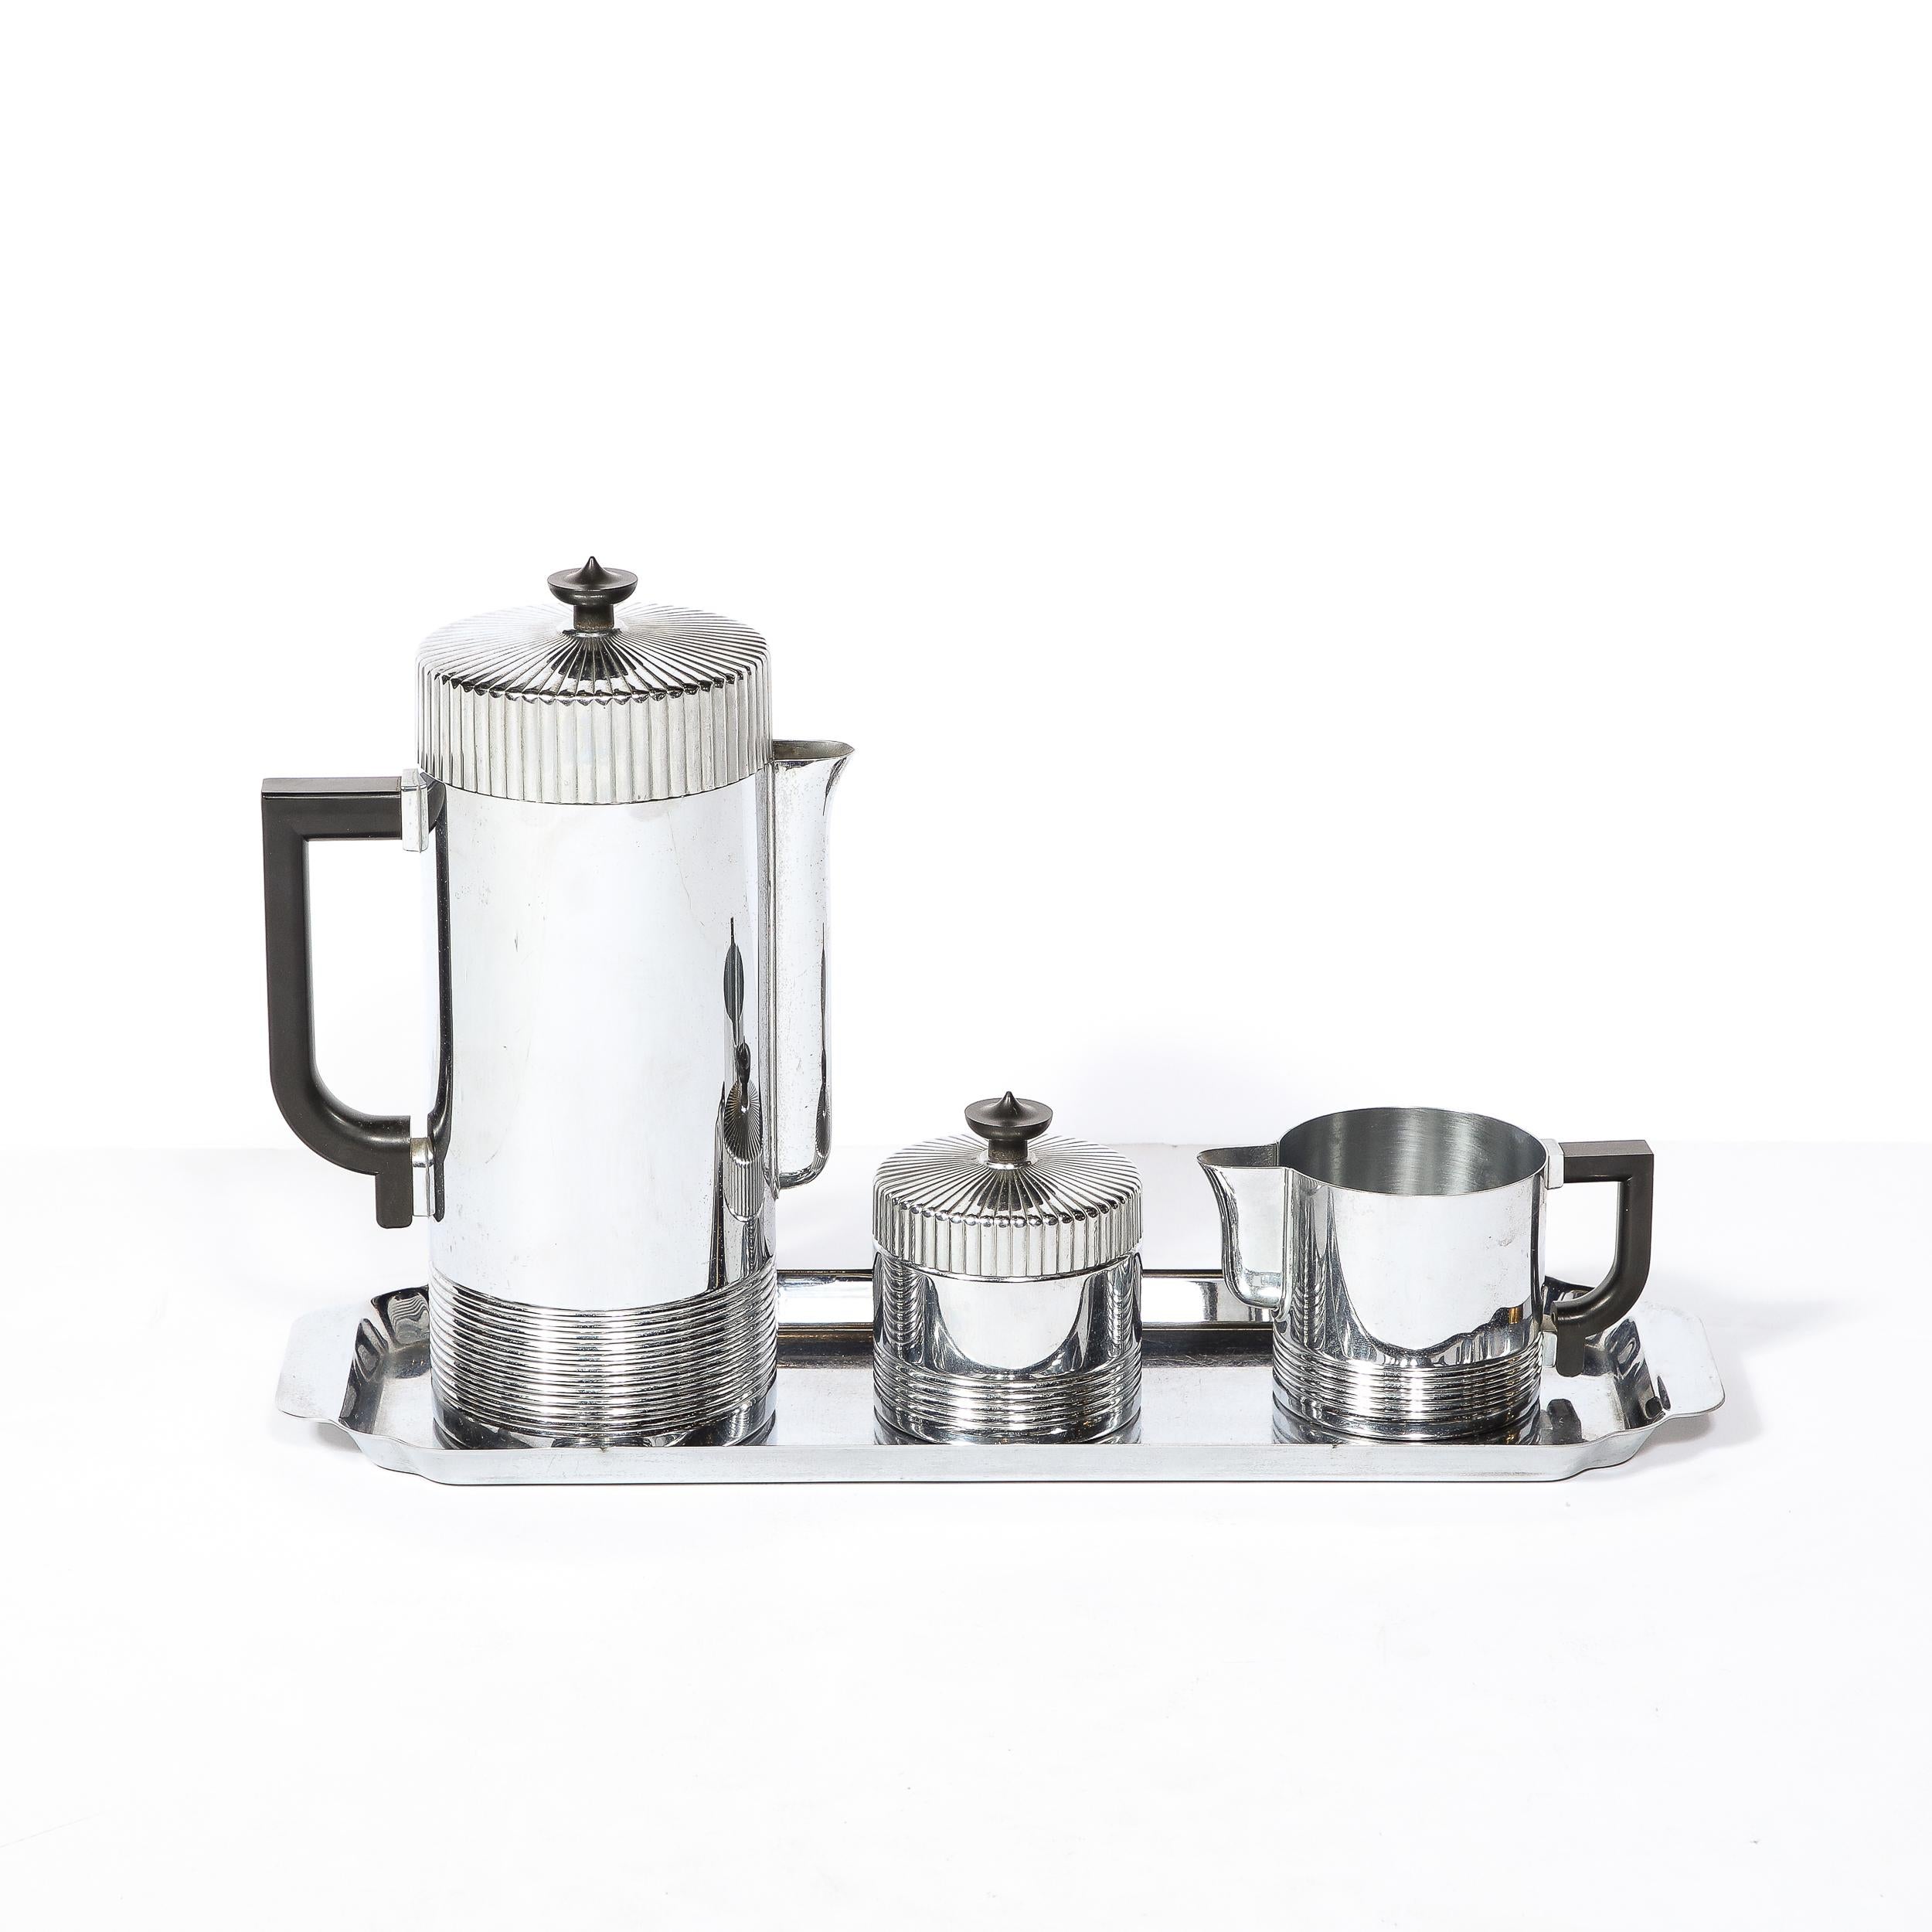 Mid-20th Century Art Deco Machine Age Chrome Coffee Service with Bakelite Handles by Chase For Sale